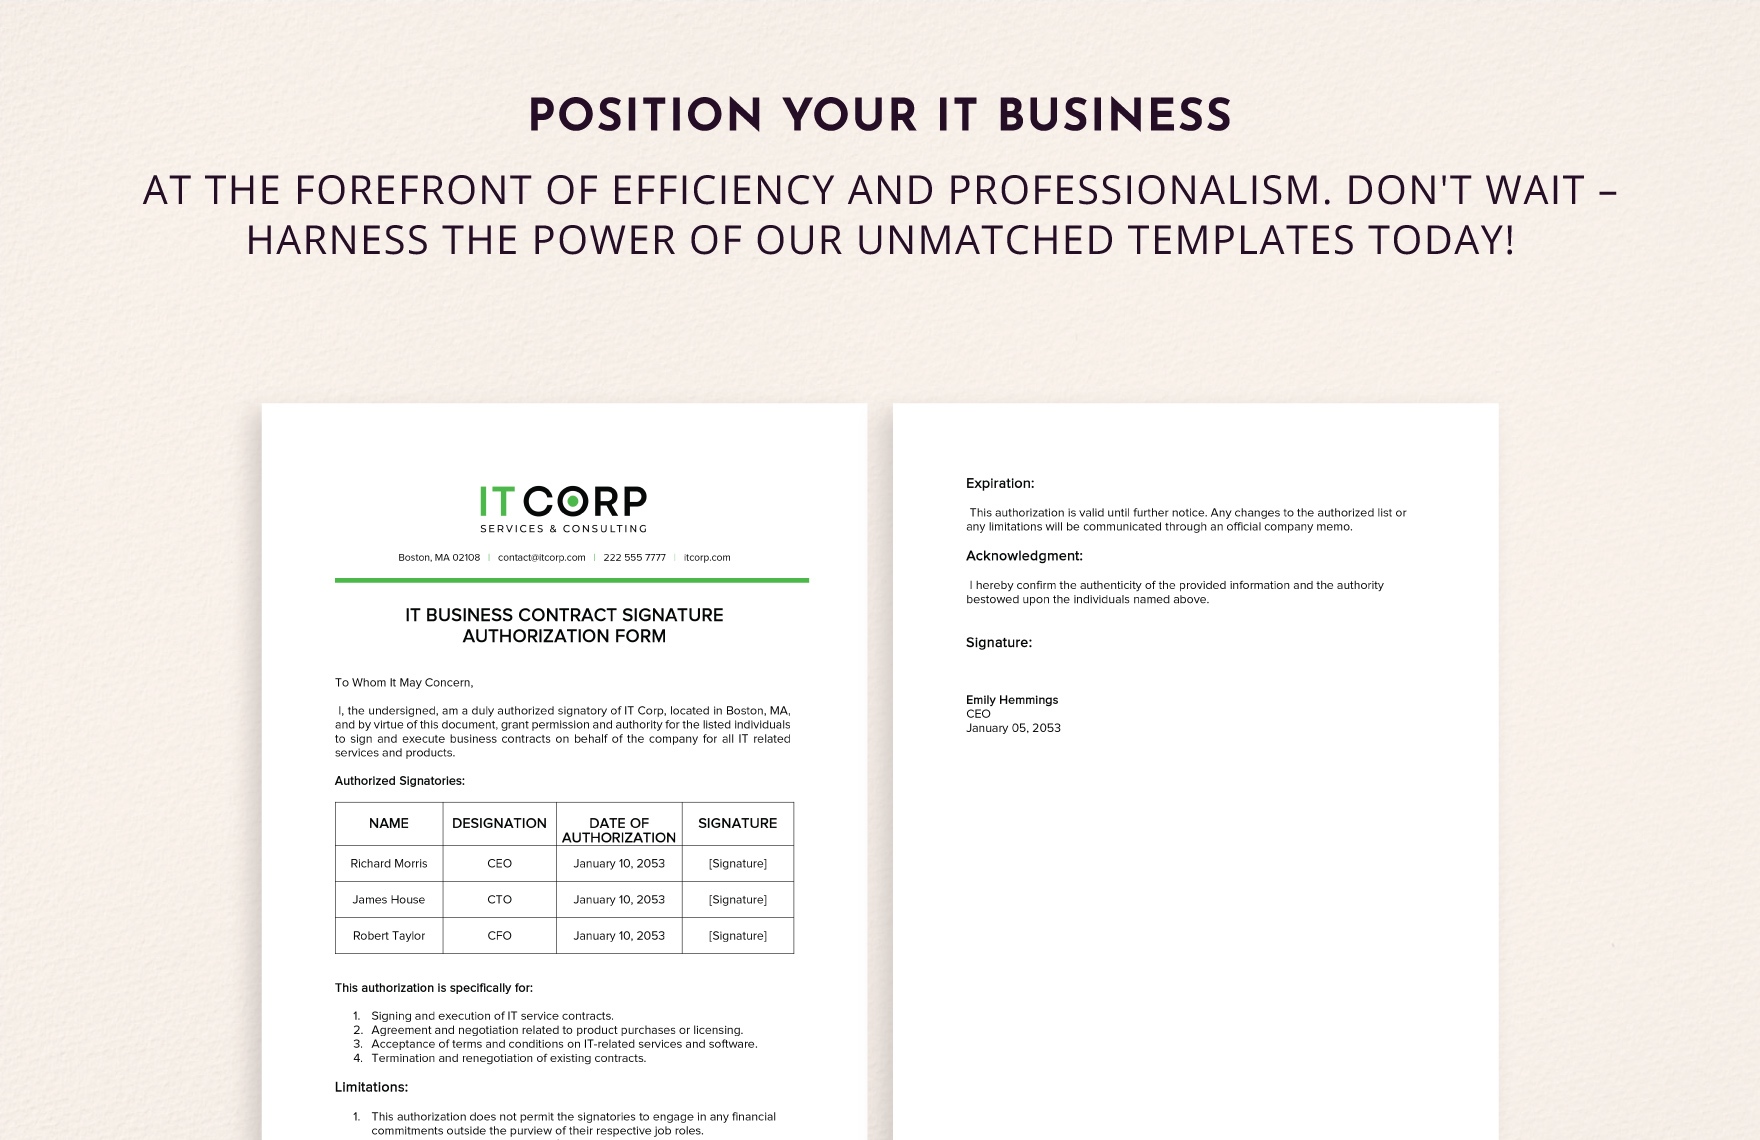 IT Business Contract Signature Authorization Form Template